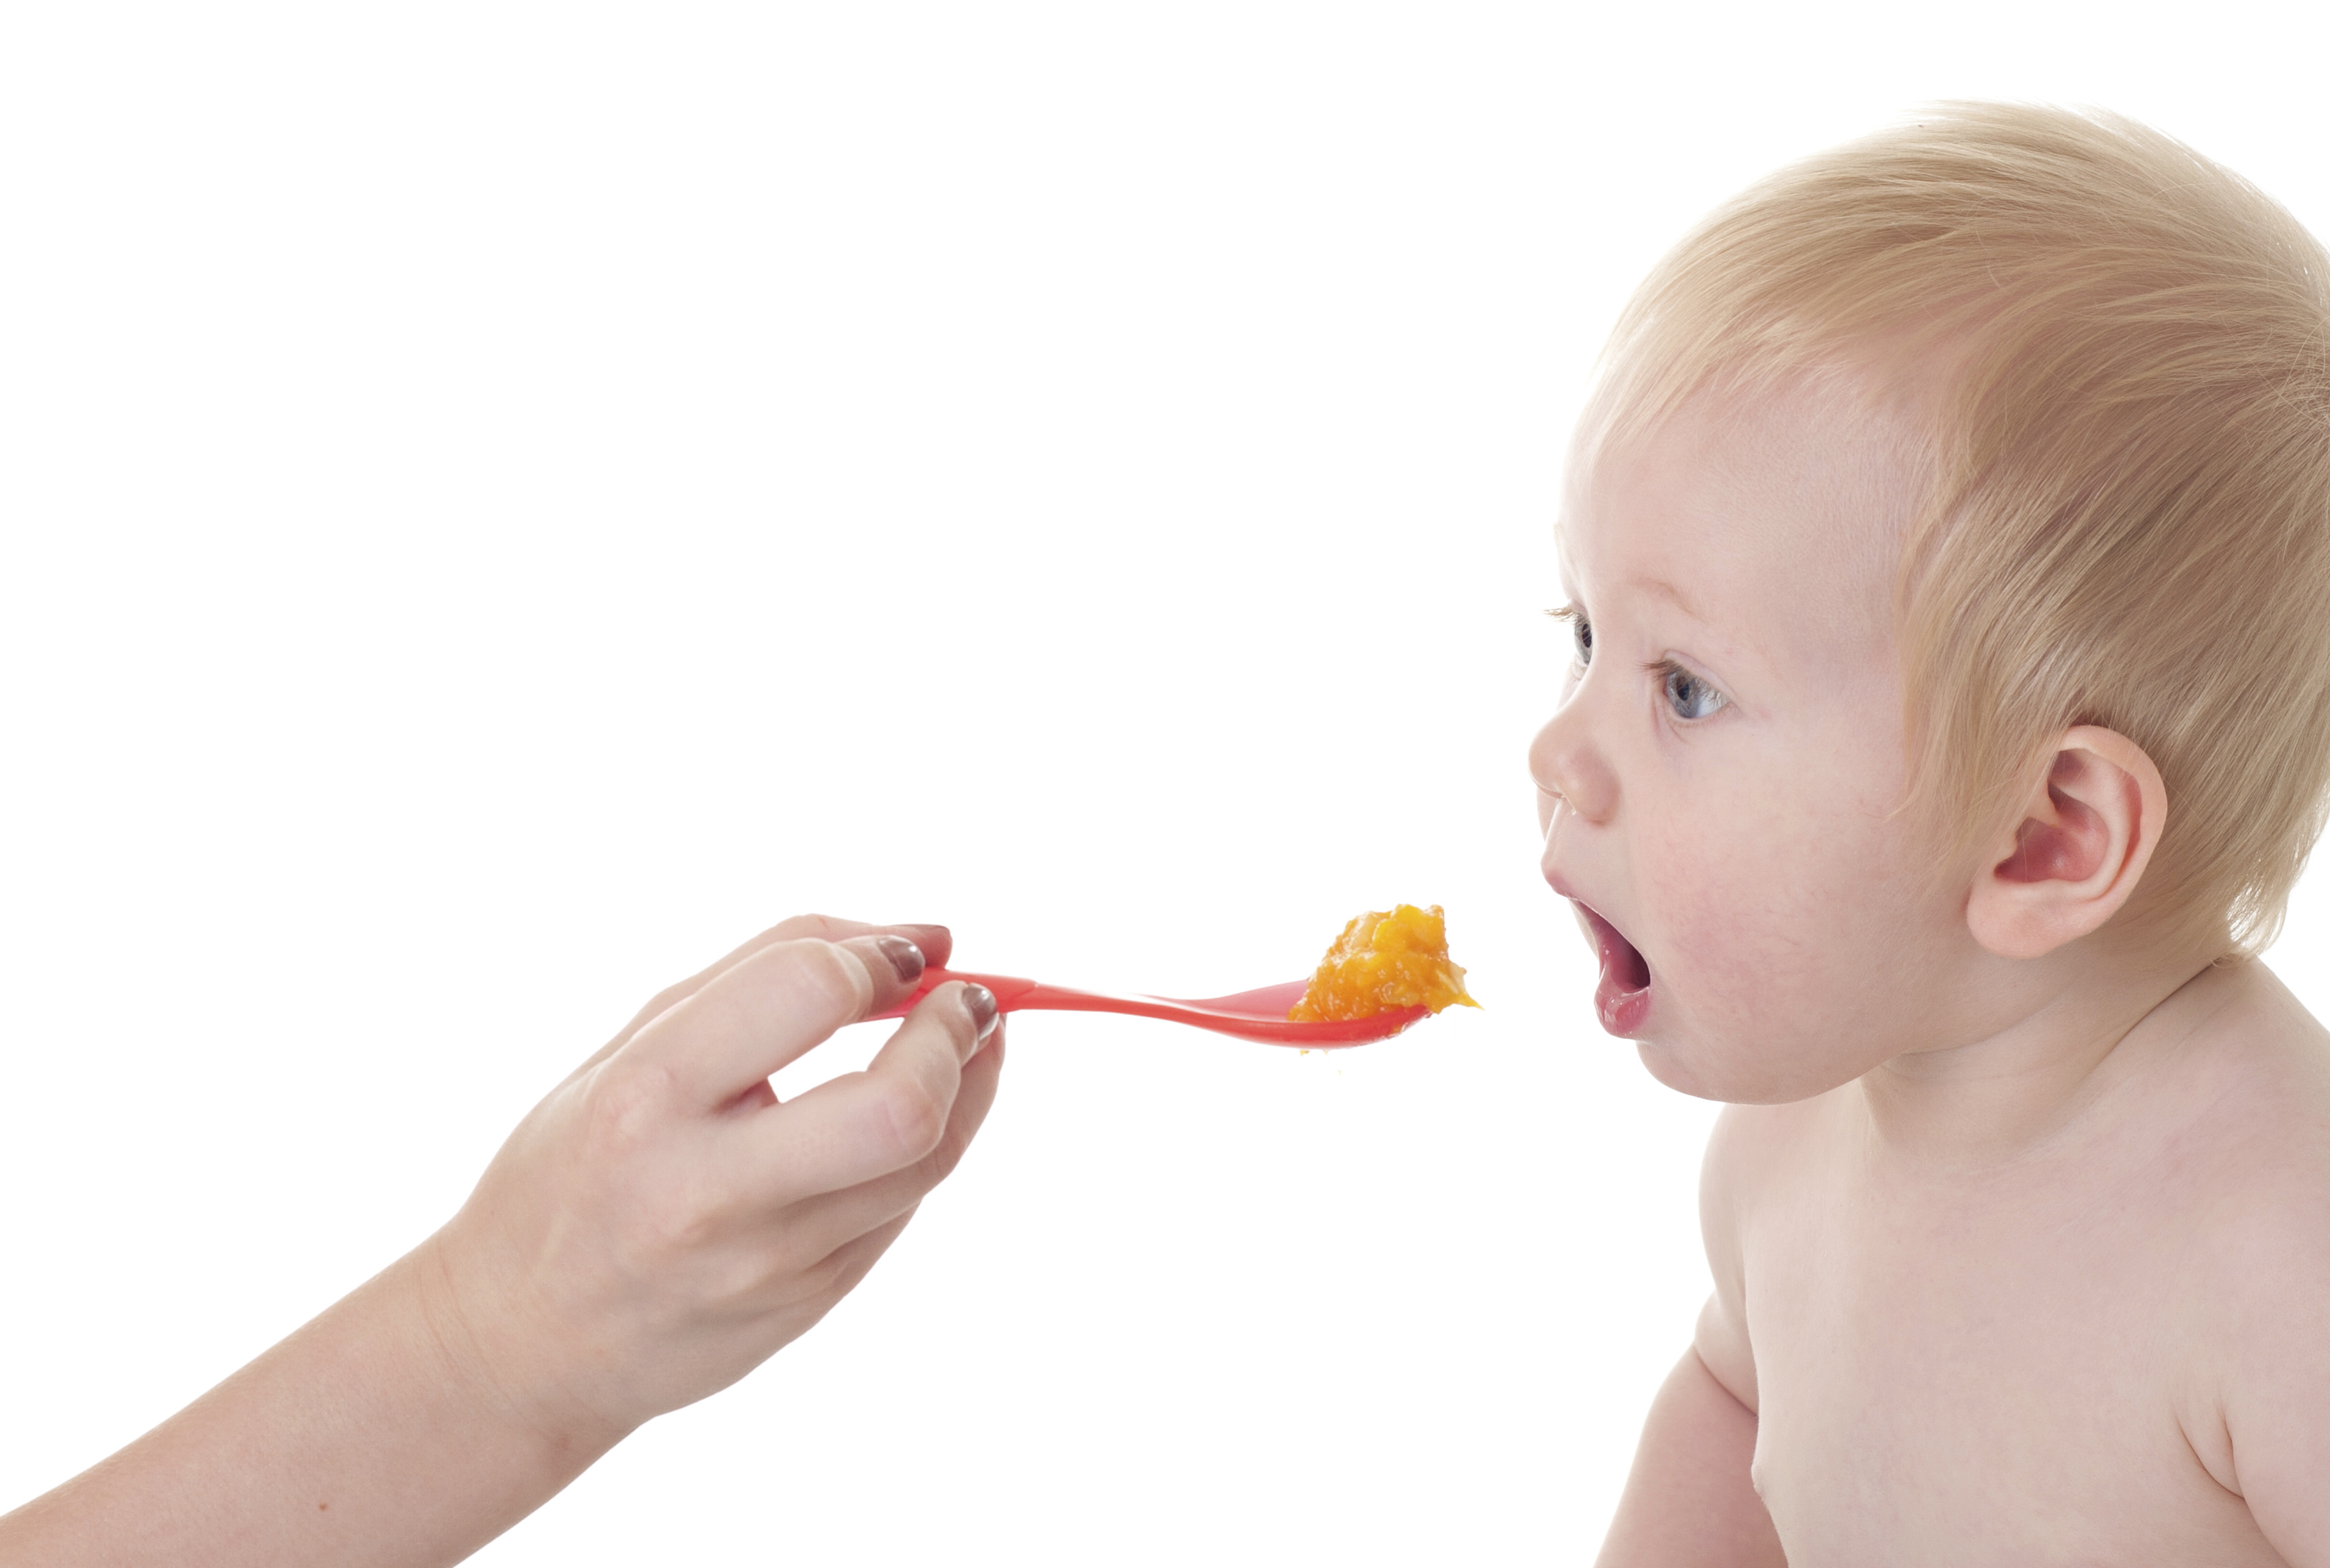 baby eating spoon